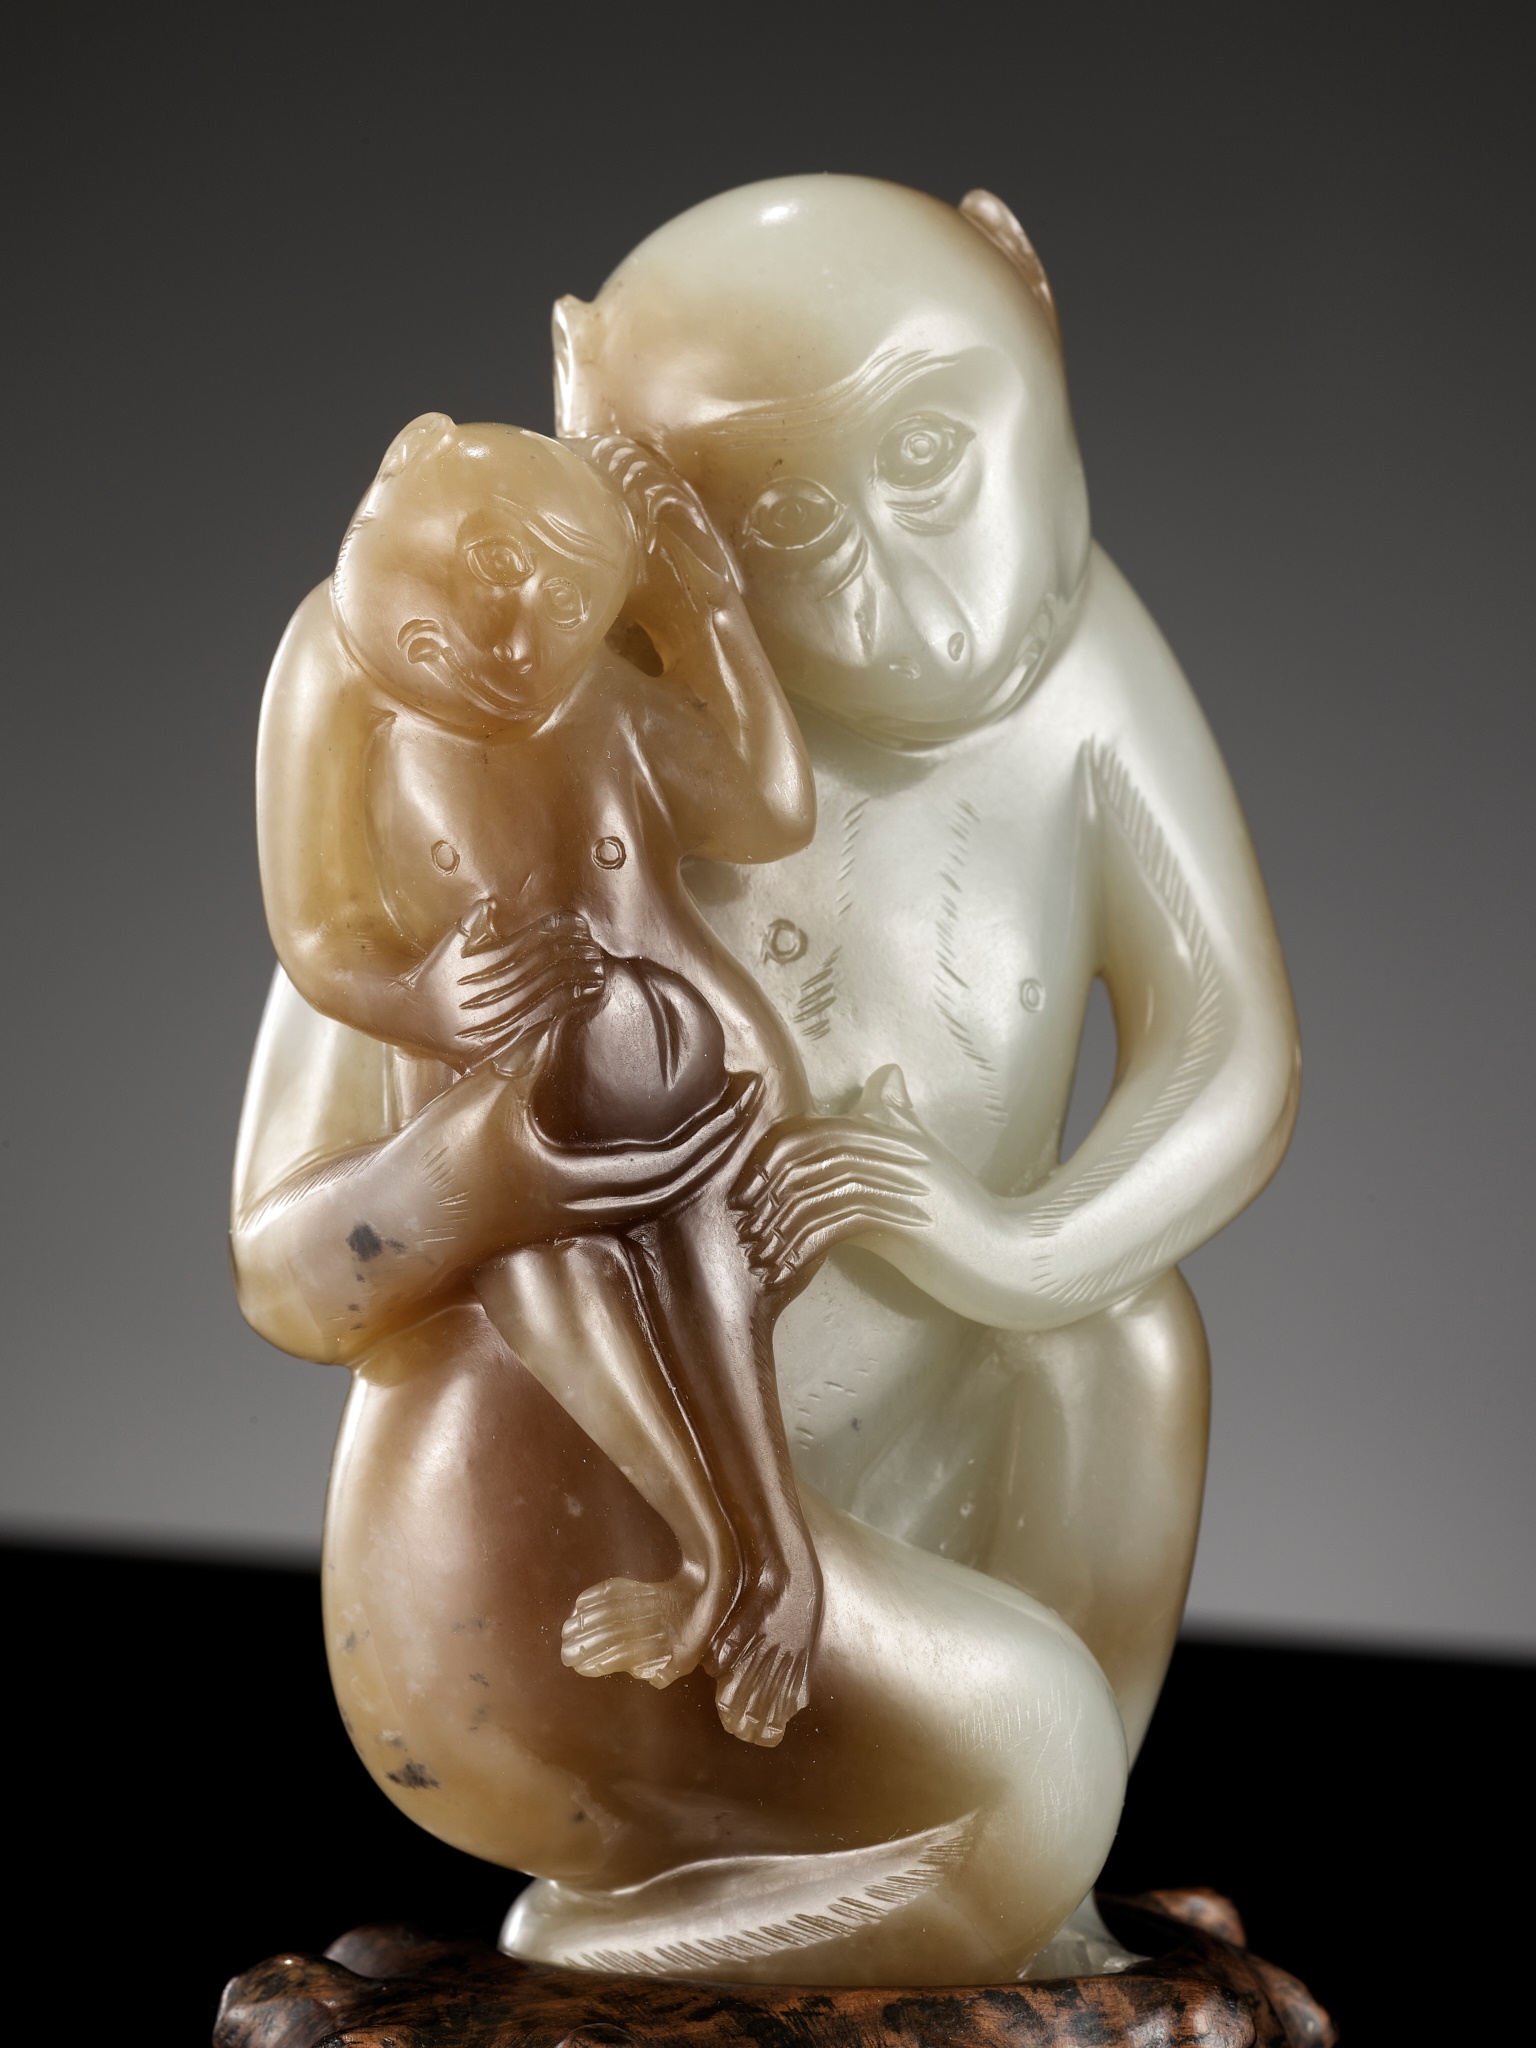 A FINE PALE CELADON AND CHESTNUT BROWN JADE 'MONKEYS AND PEACH' GROUP, 18TH CENTURY - Image 18 of 21